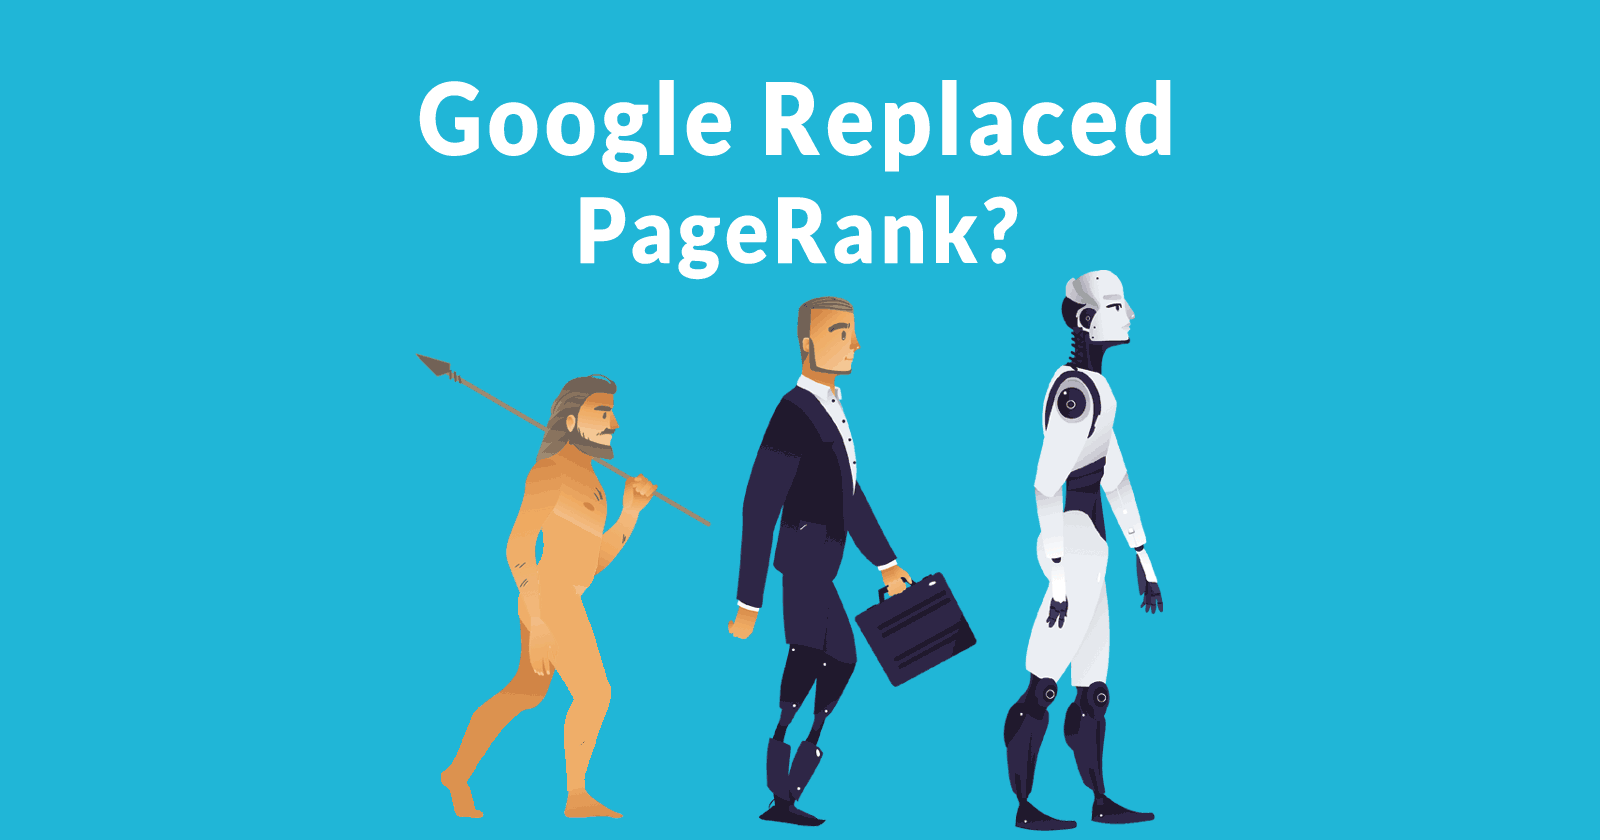 Google Replaced PageRank?